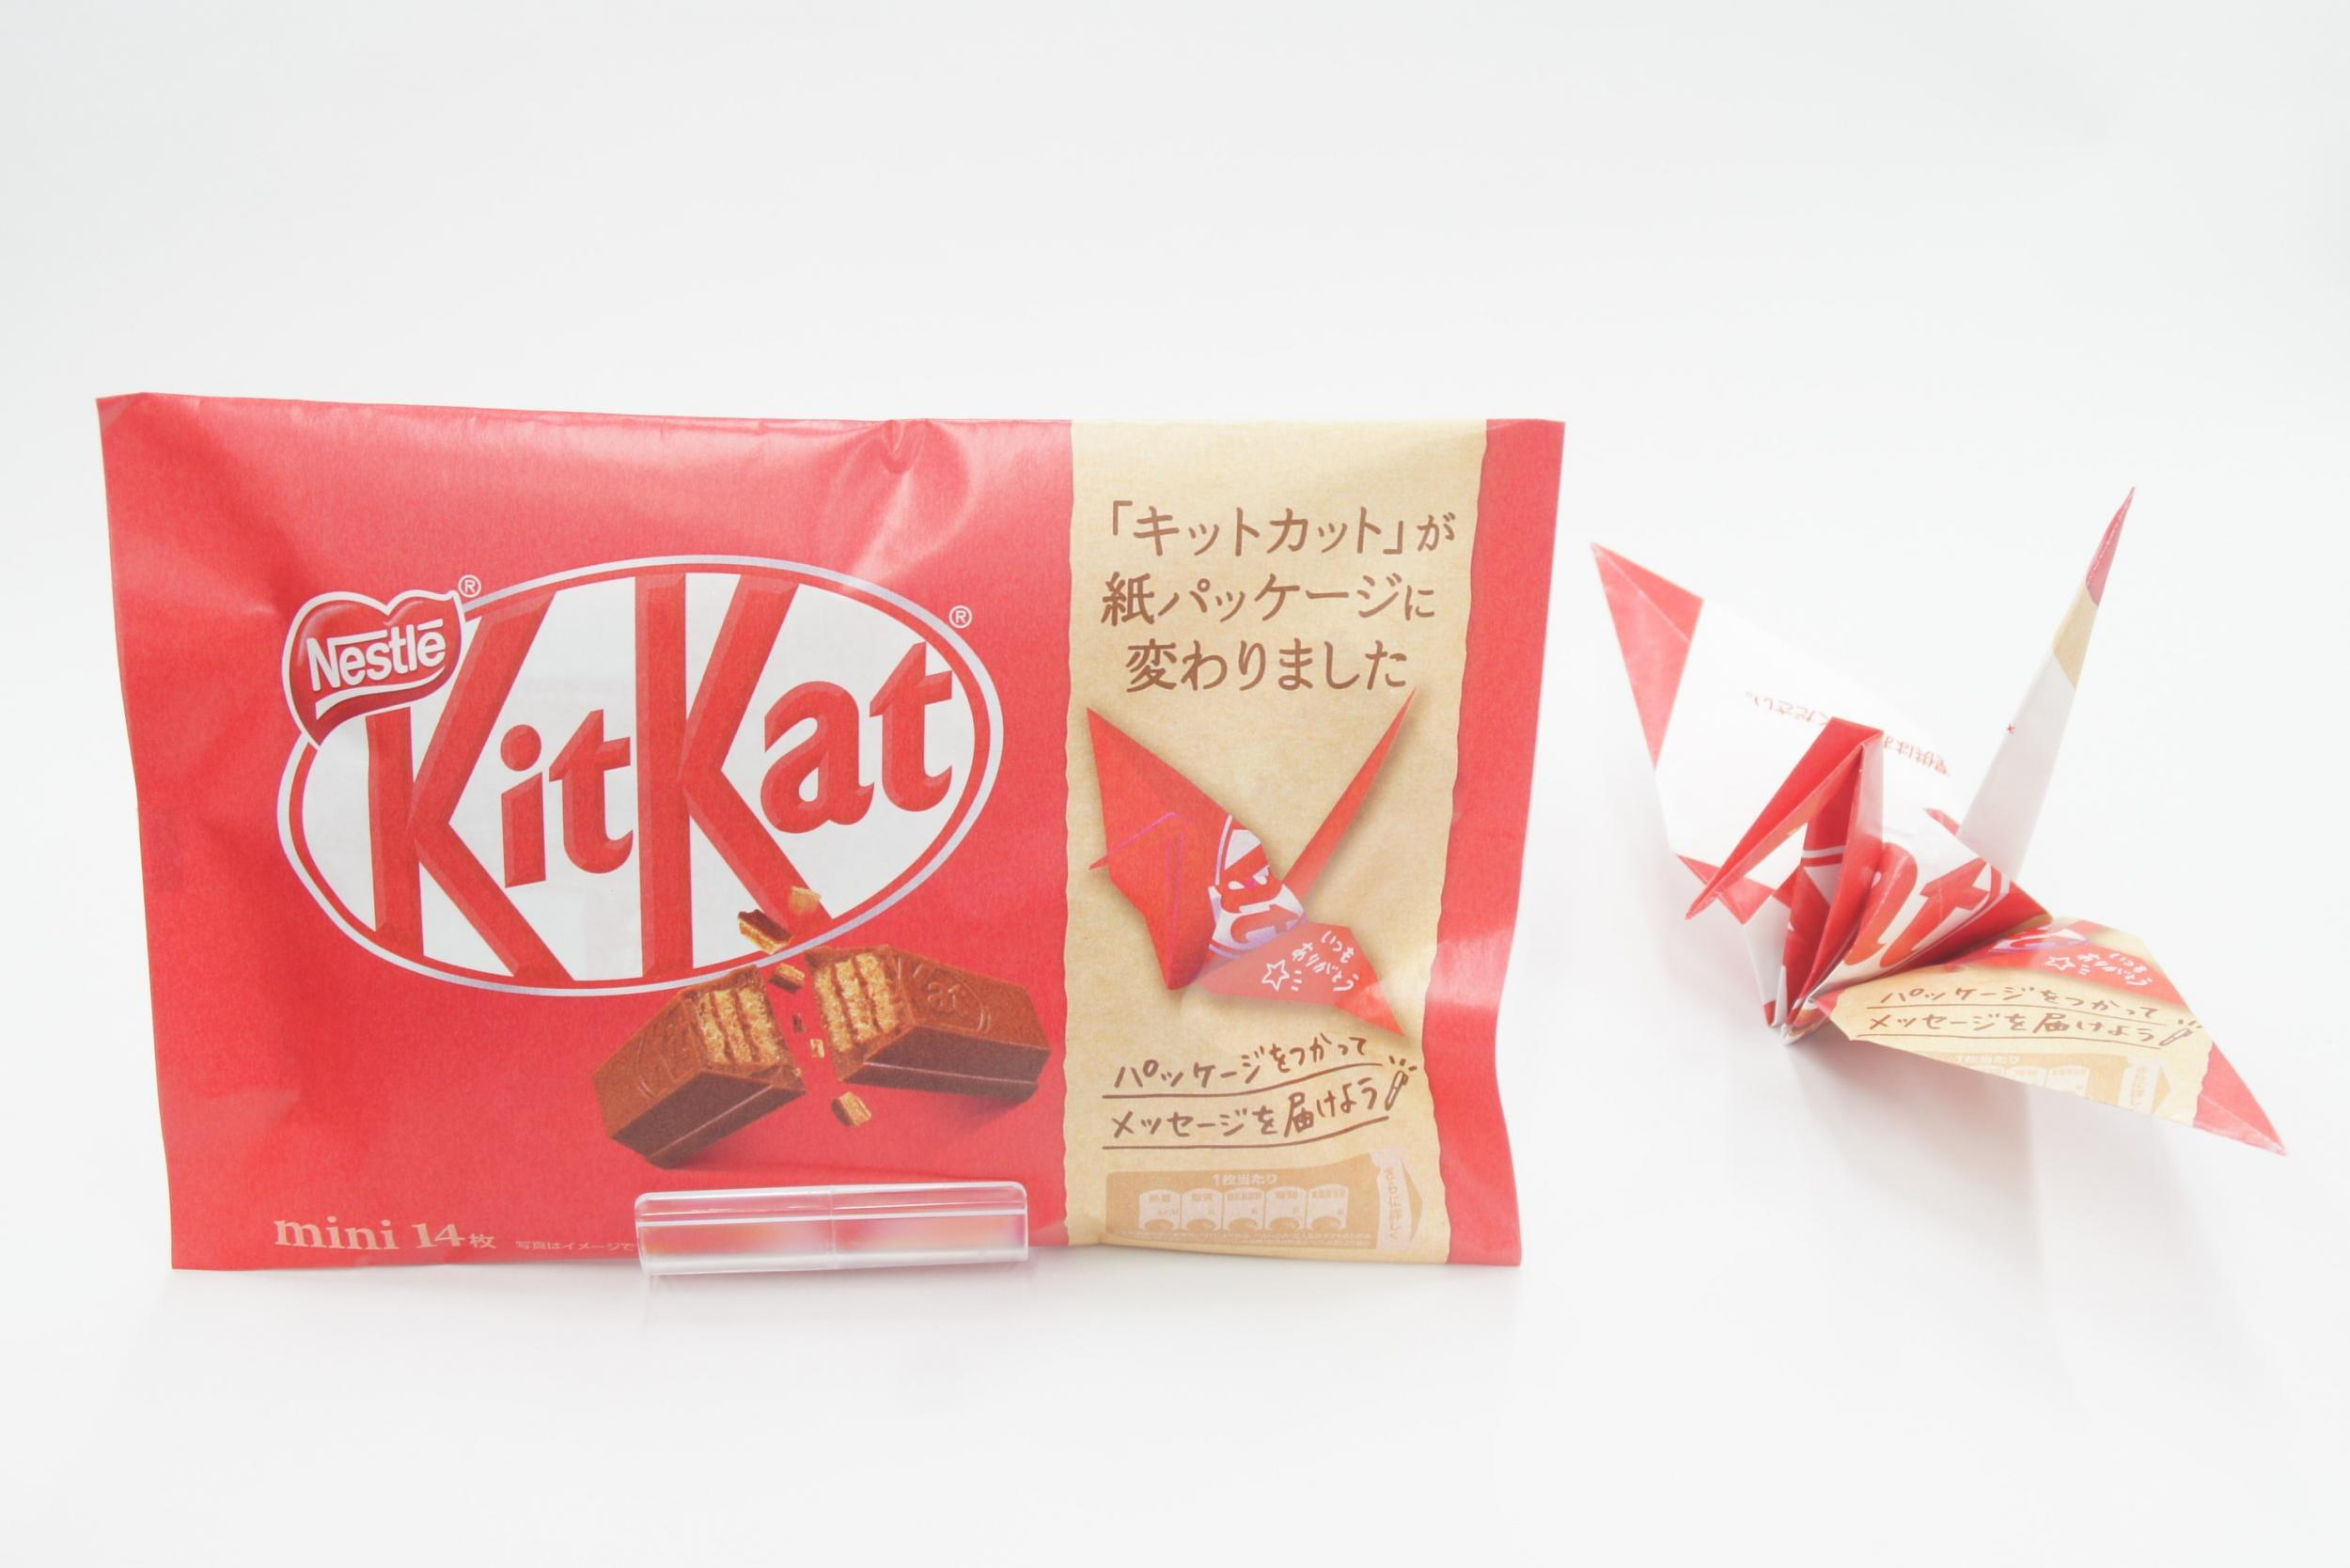 What Is Origamy Kitkat Japan To Use Paper Packaging That Can Be Folded Into Origami